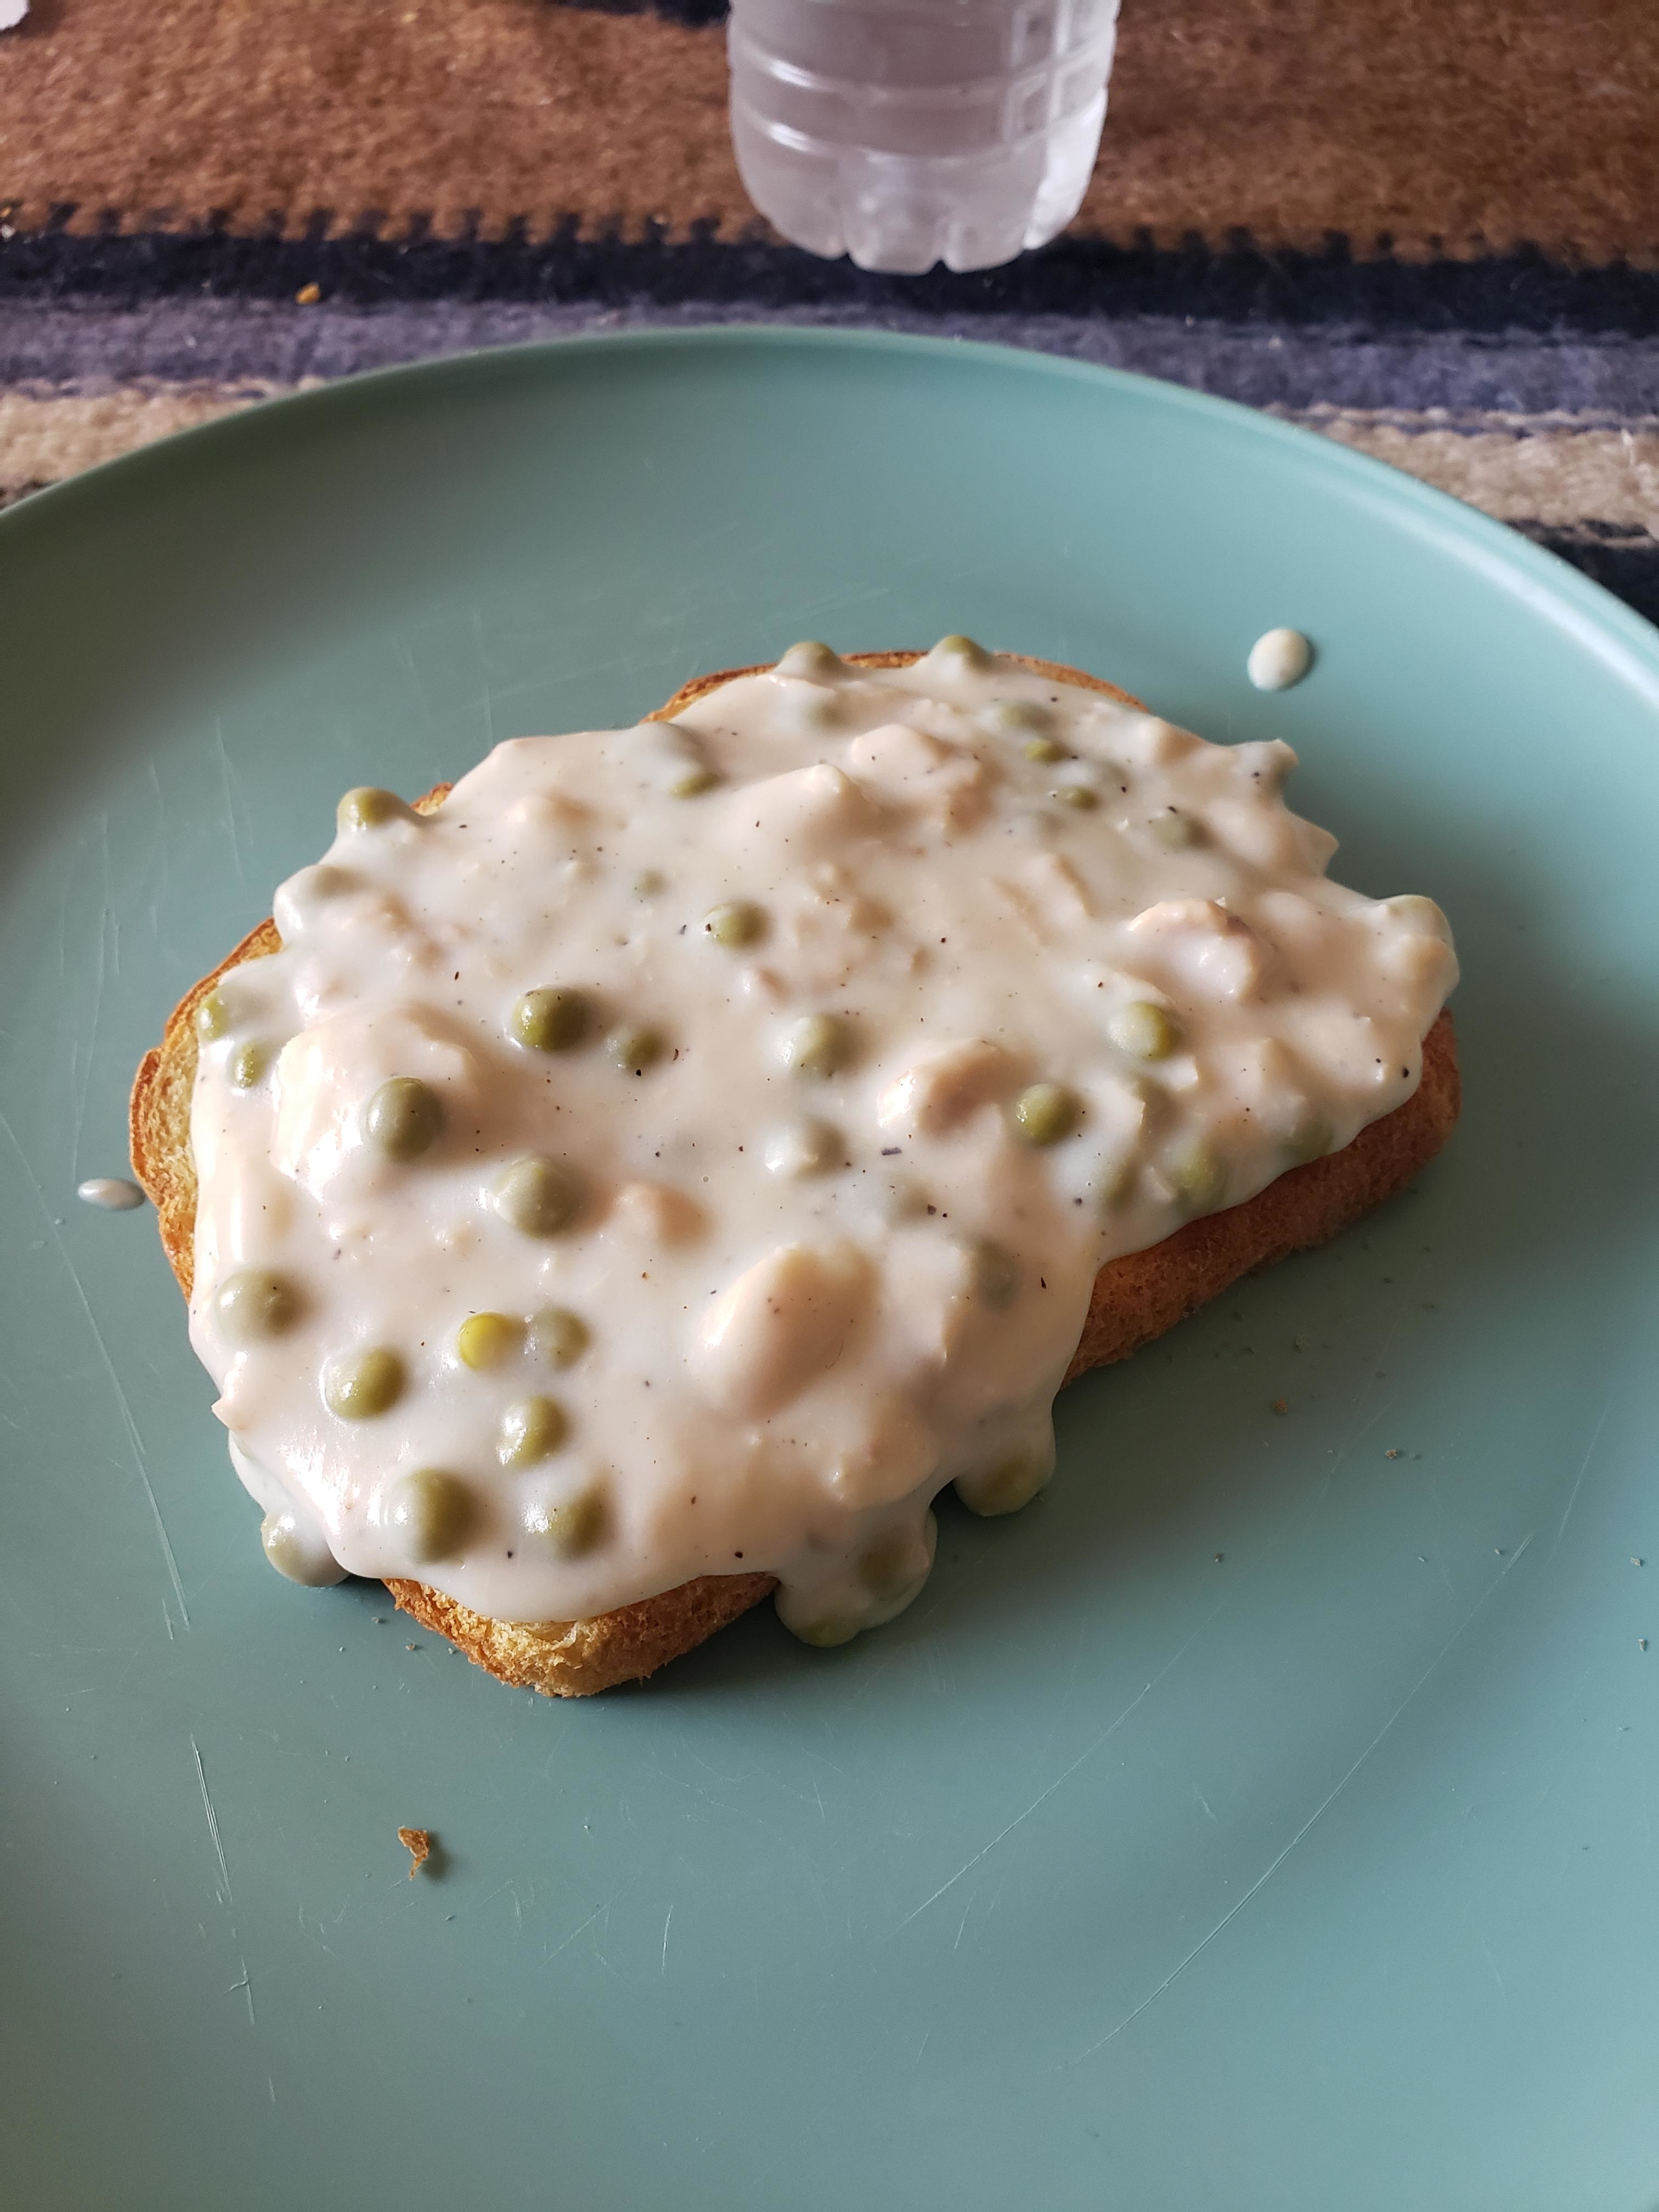 A piece of toast on a plate, topped with a creamy sauce with green peas